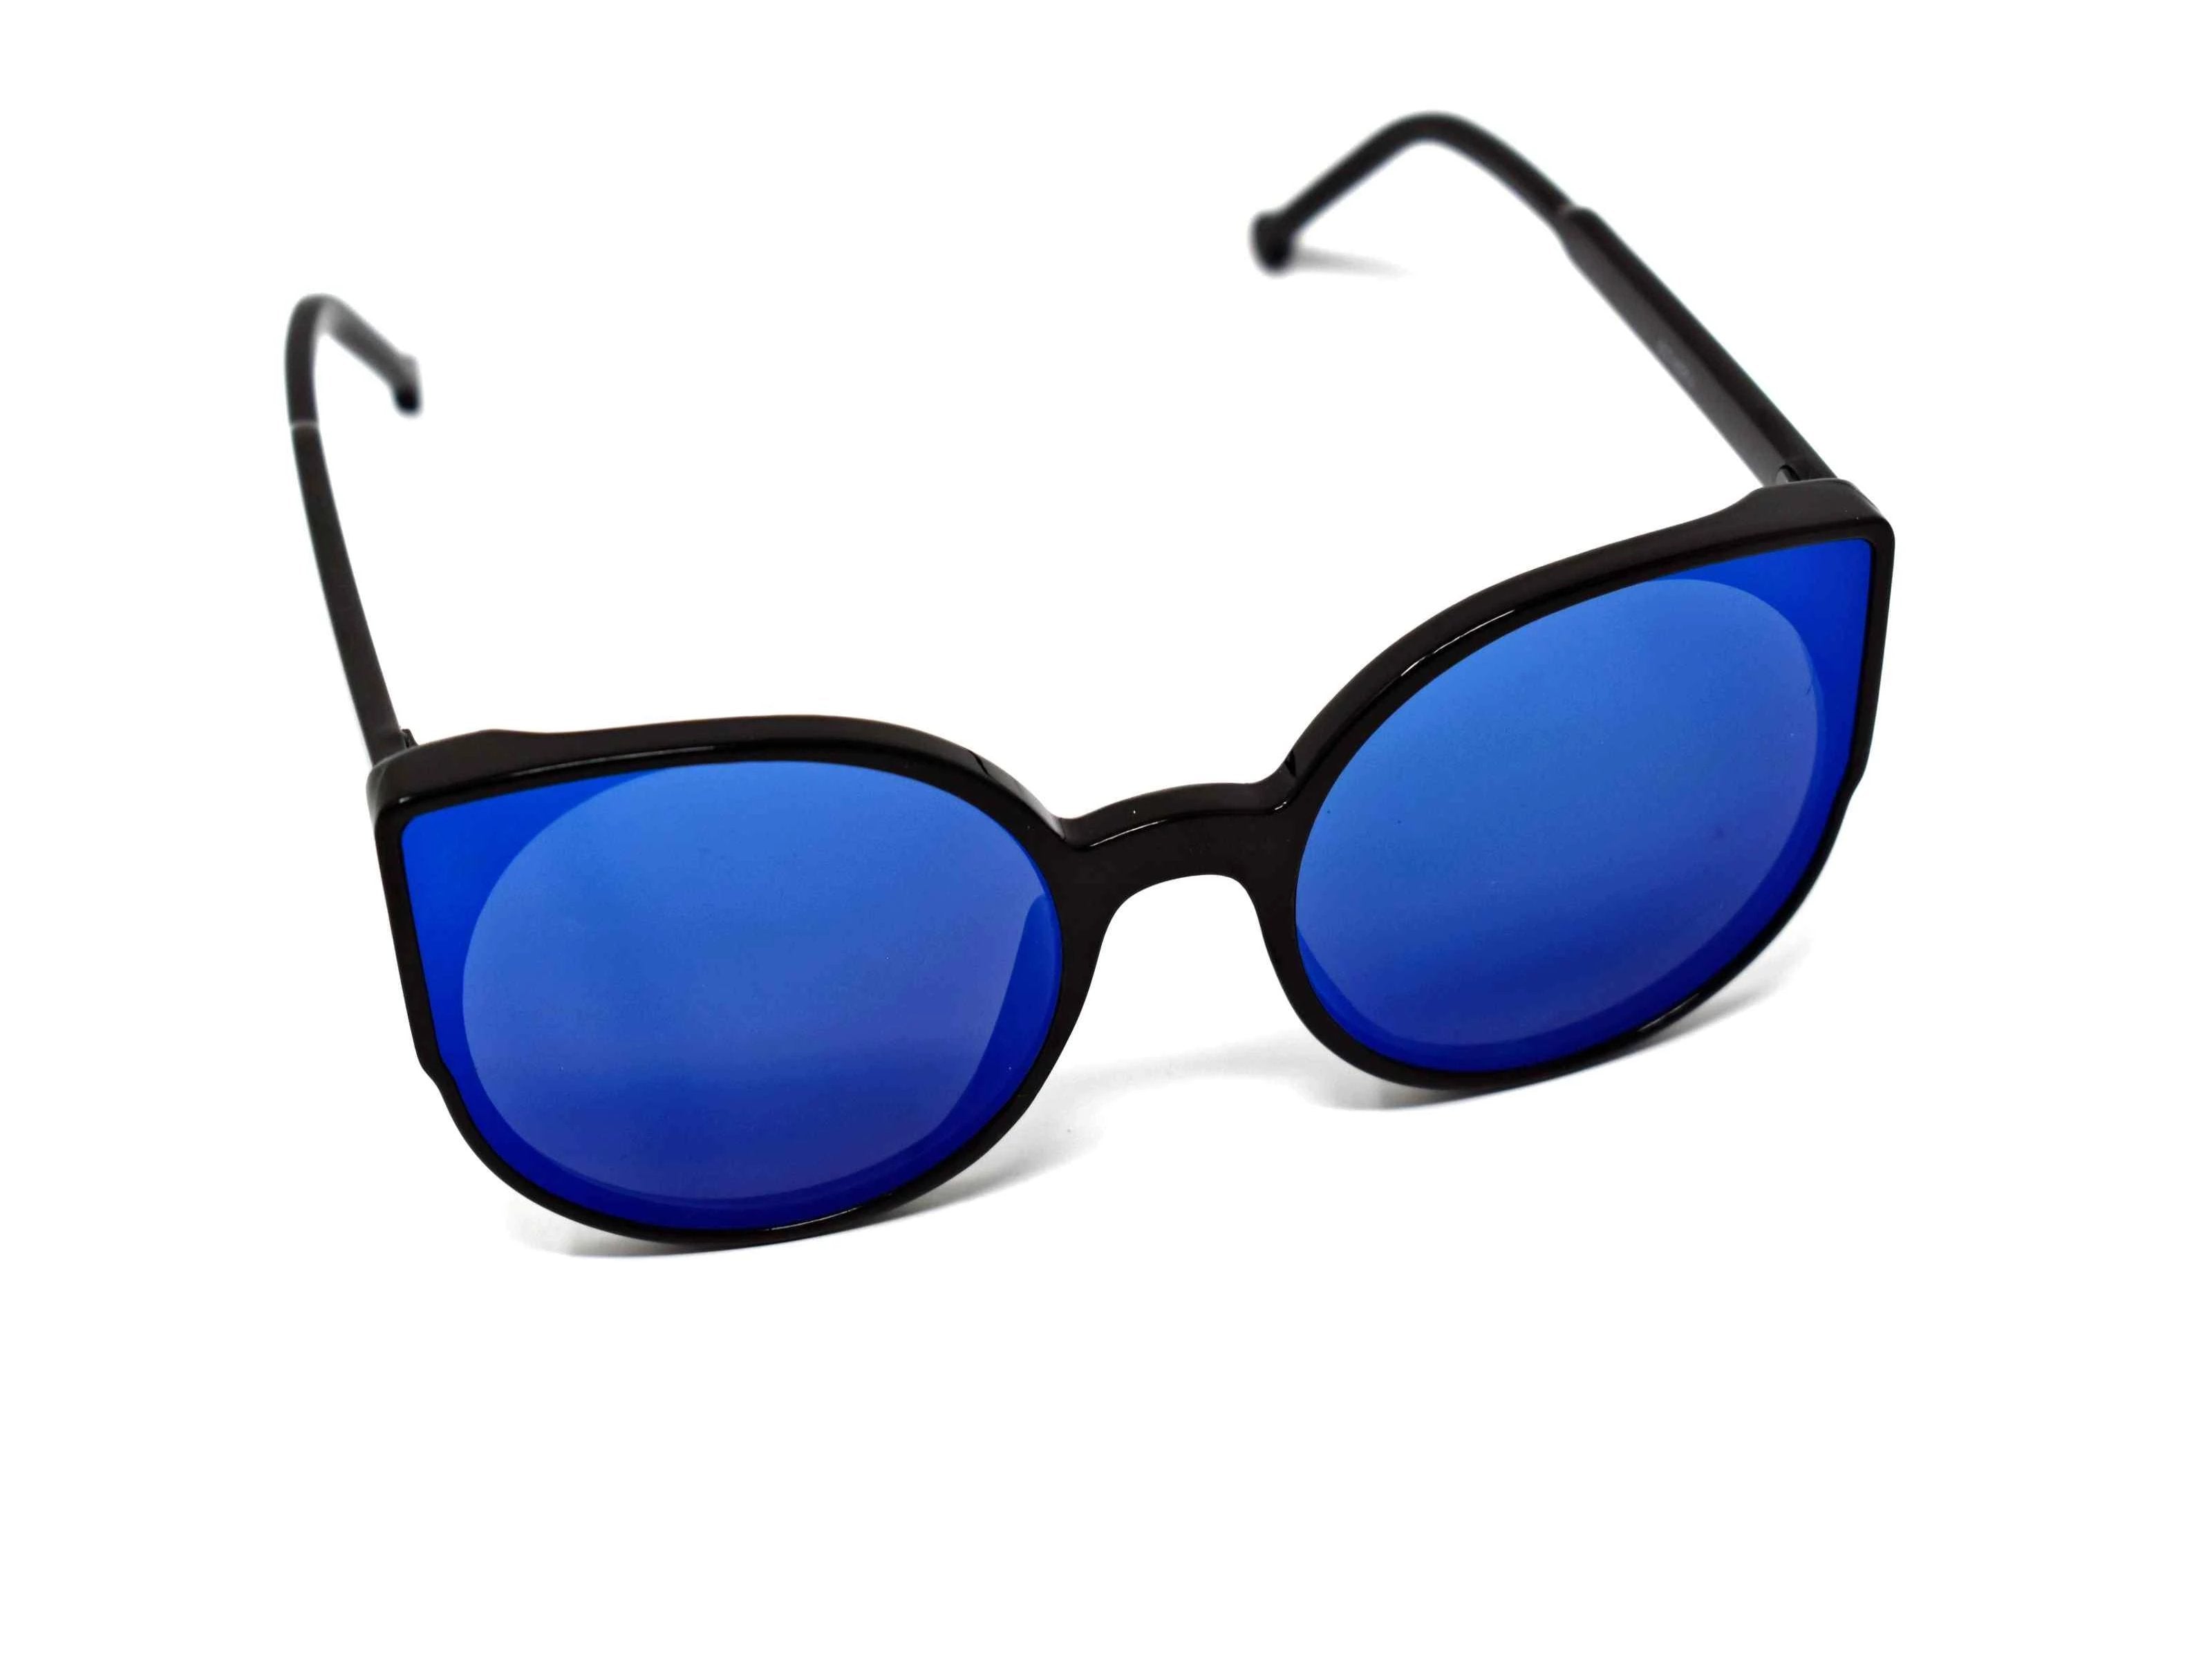 Say hello to our stylish Tansy black framed sunglasses with blue mirrored lens and a cat eye shape. 